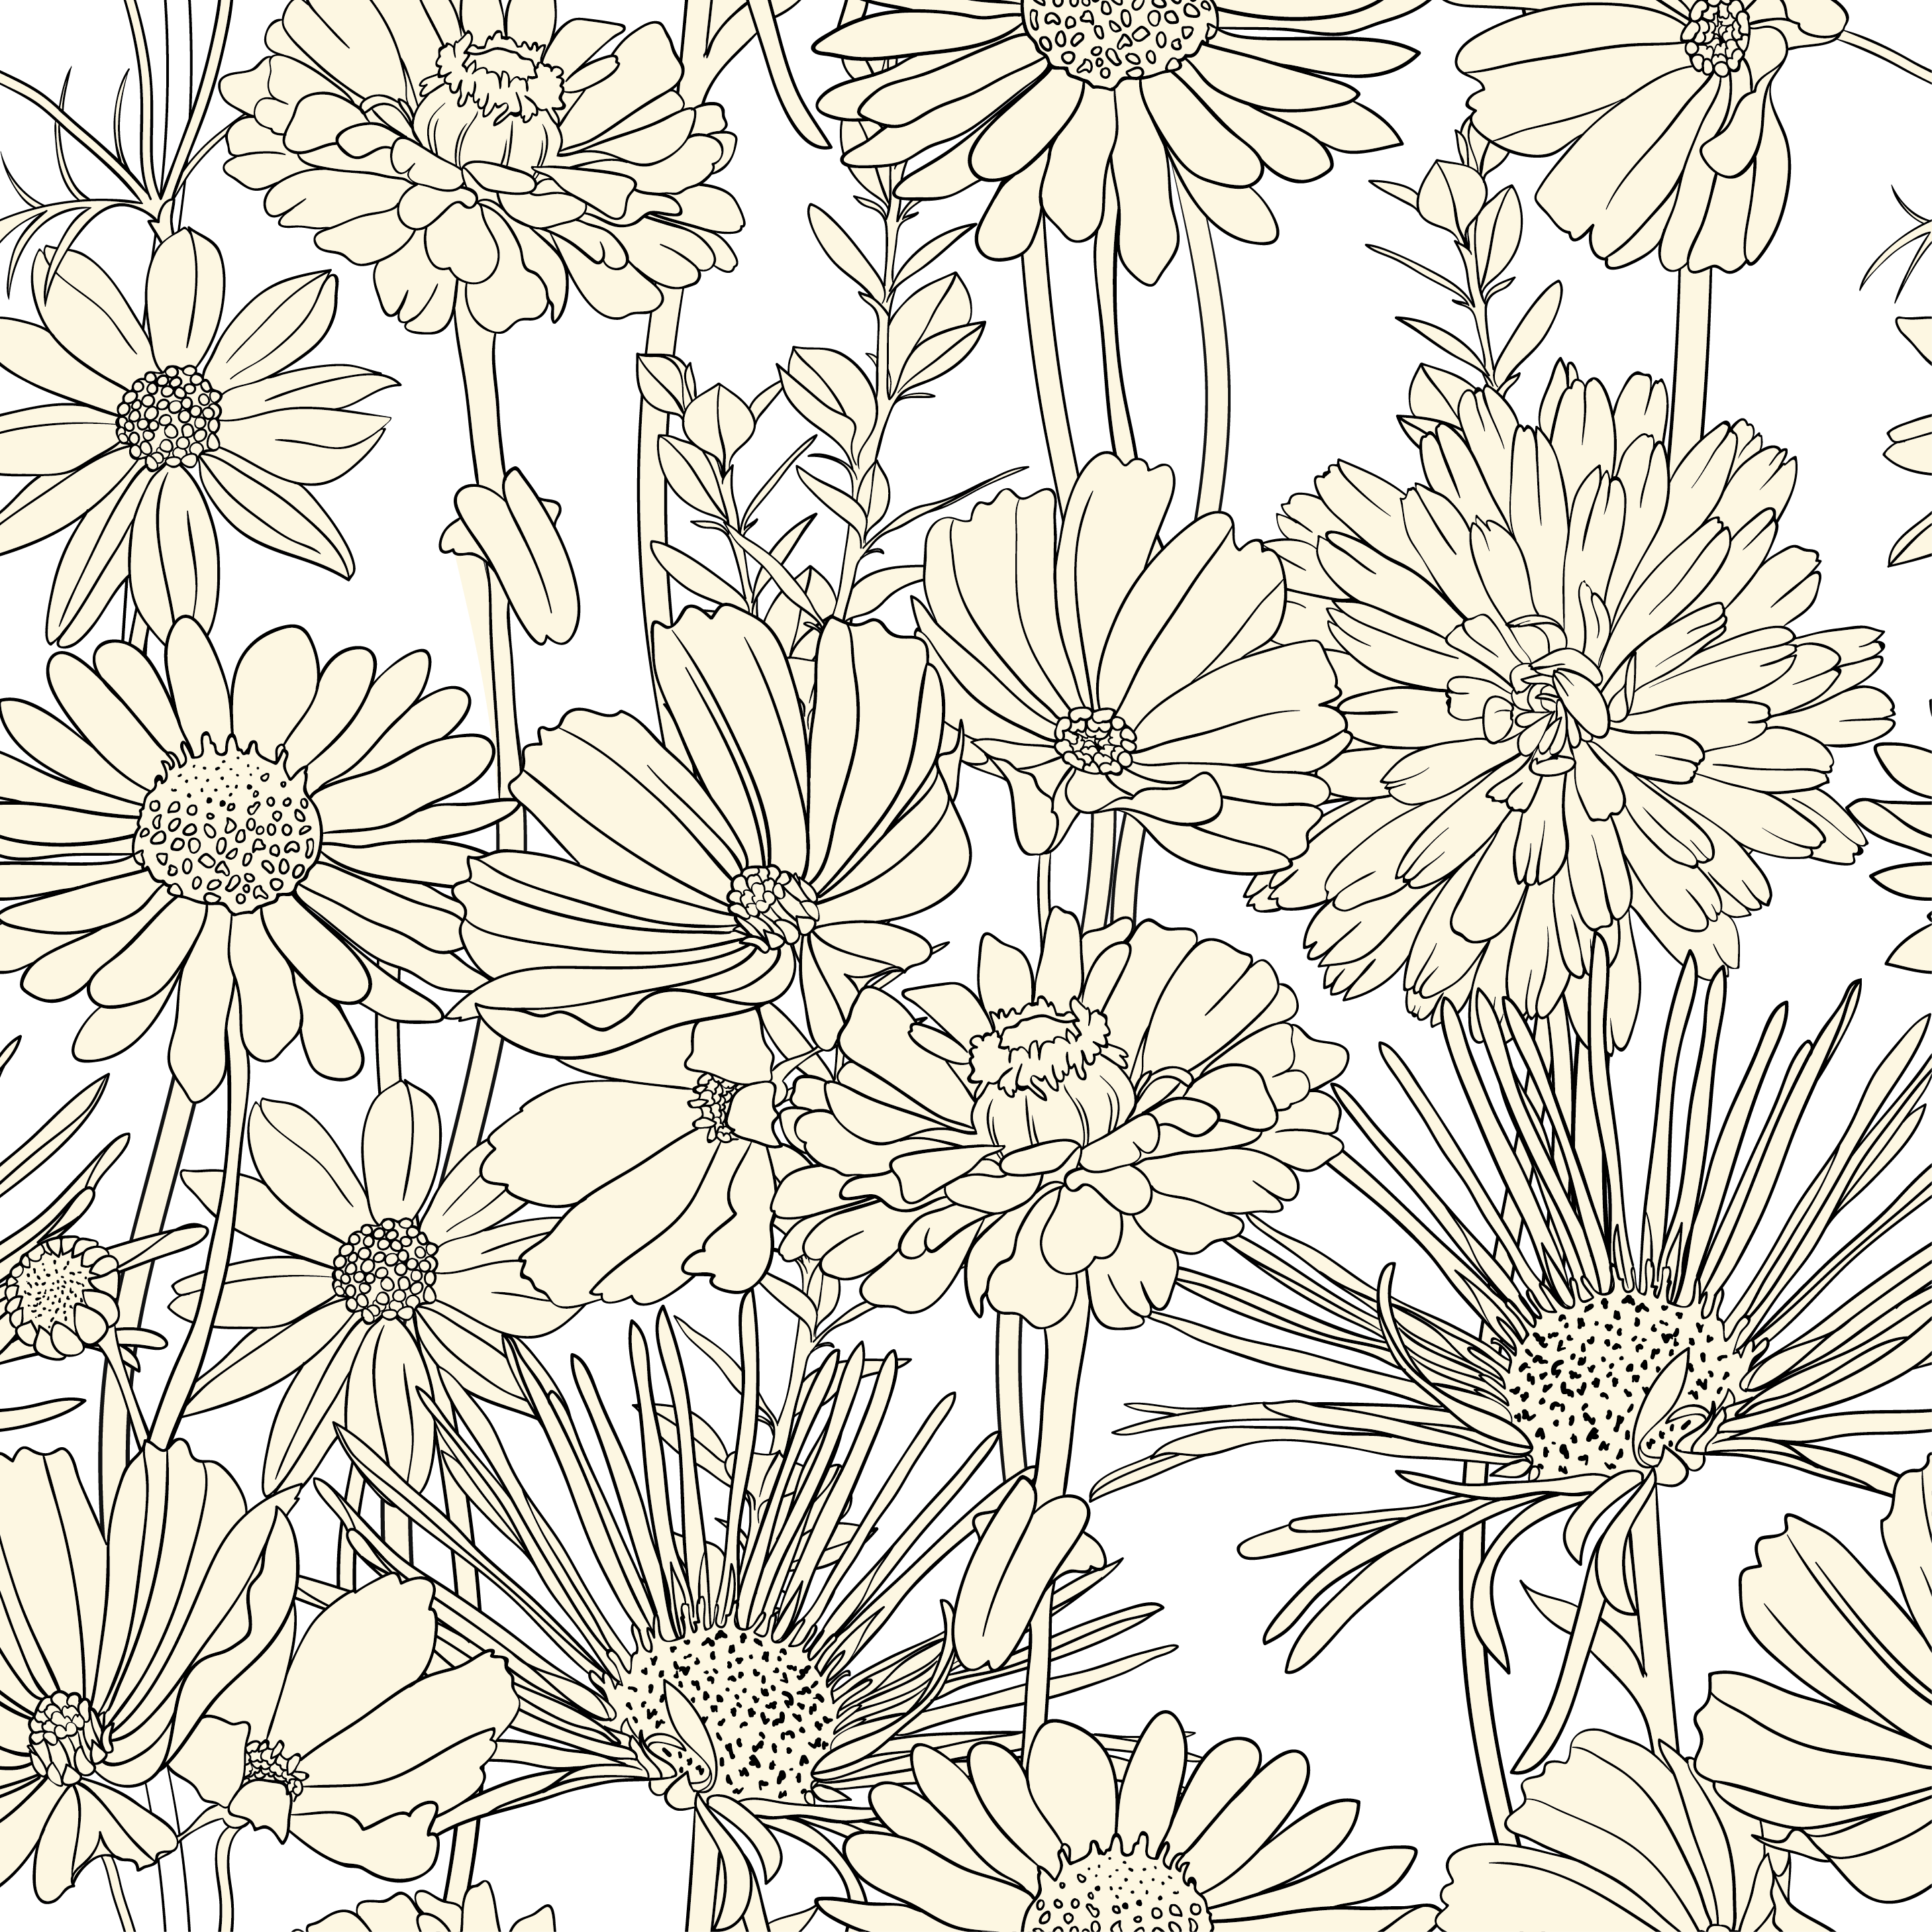 Draw Flowers Drawing Pattern Flowers Black And White Line Art Background Vector Material Png Download 2917 2917 Free Transparent Draw Flowers Png Download Clip Art Library